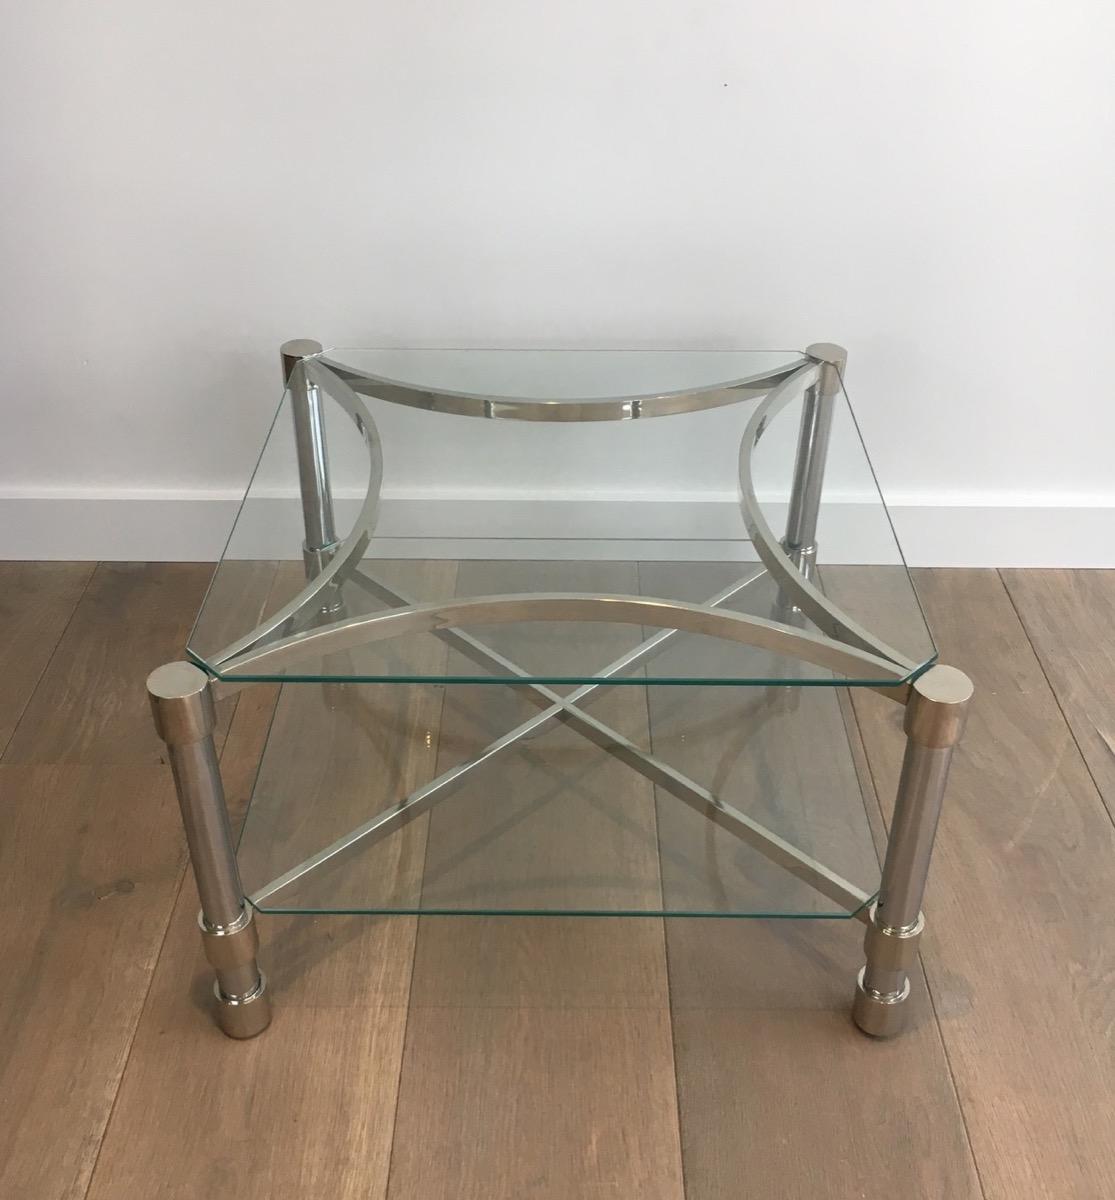 Pair of Unusual Side Tables Made of Chrome and Glass, French, circa 1970 In Good Condition For Sale In Marcq-en-Barœul, Hauts-de-France